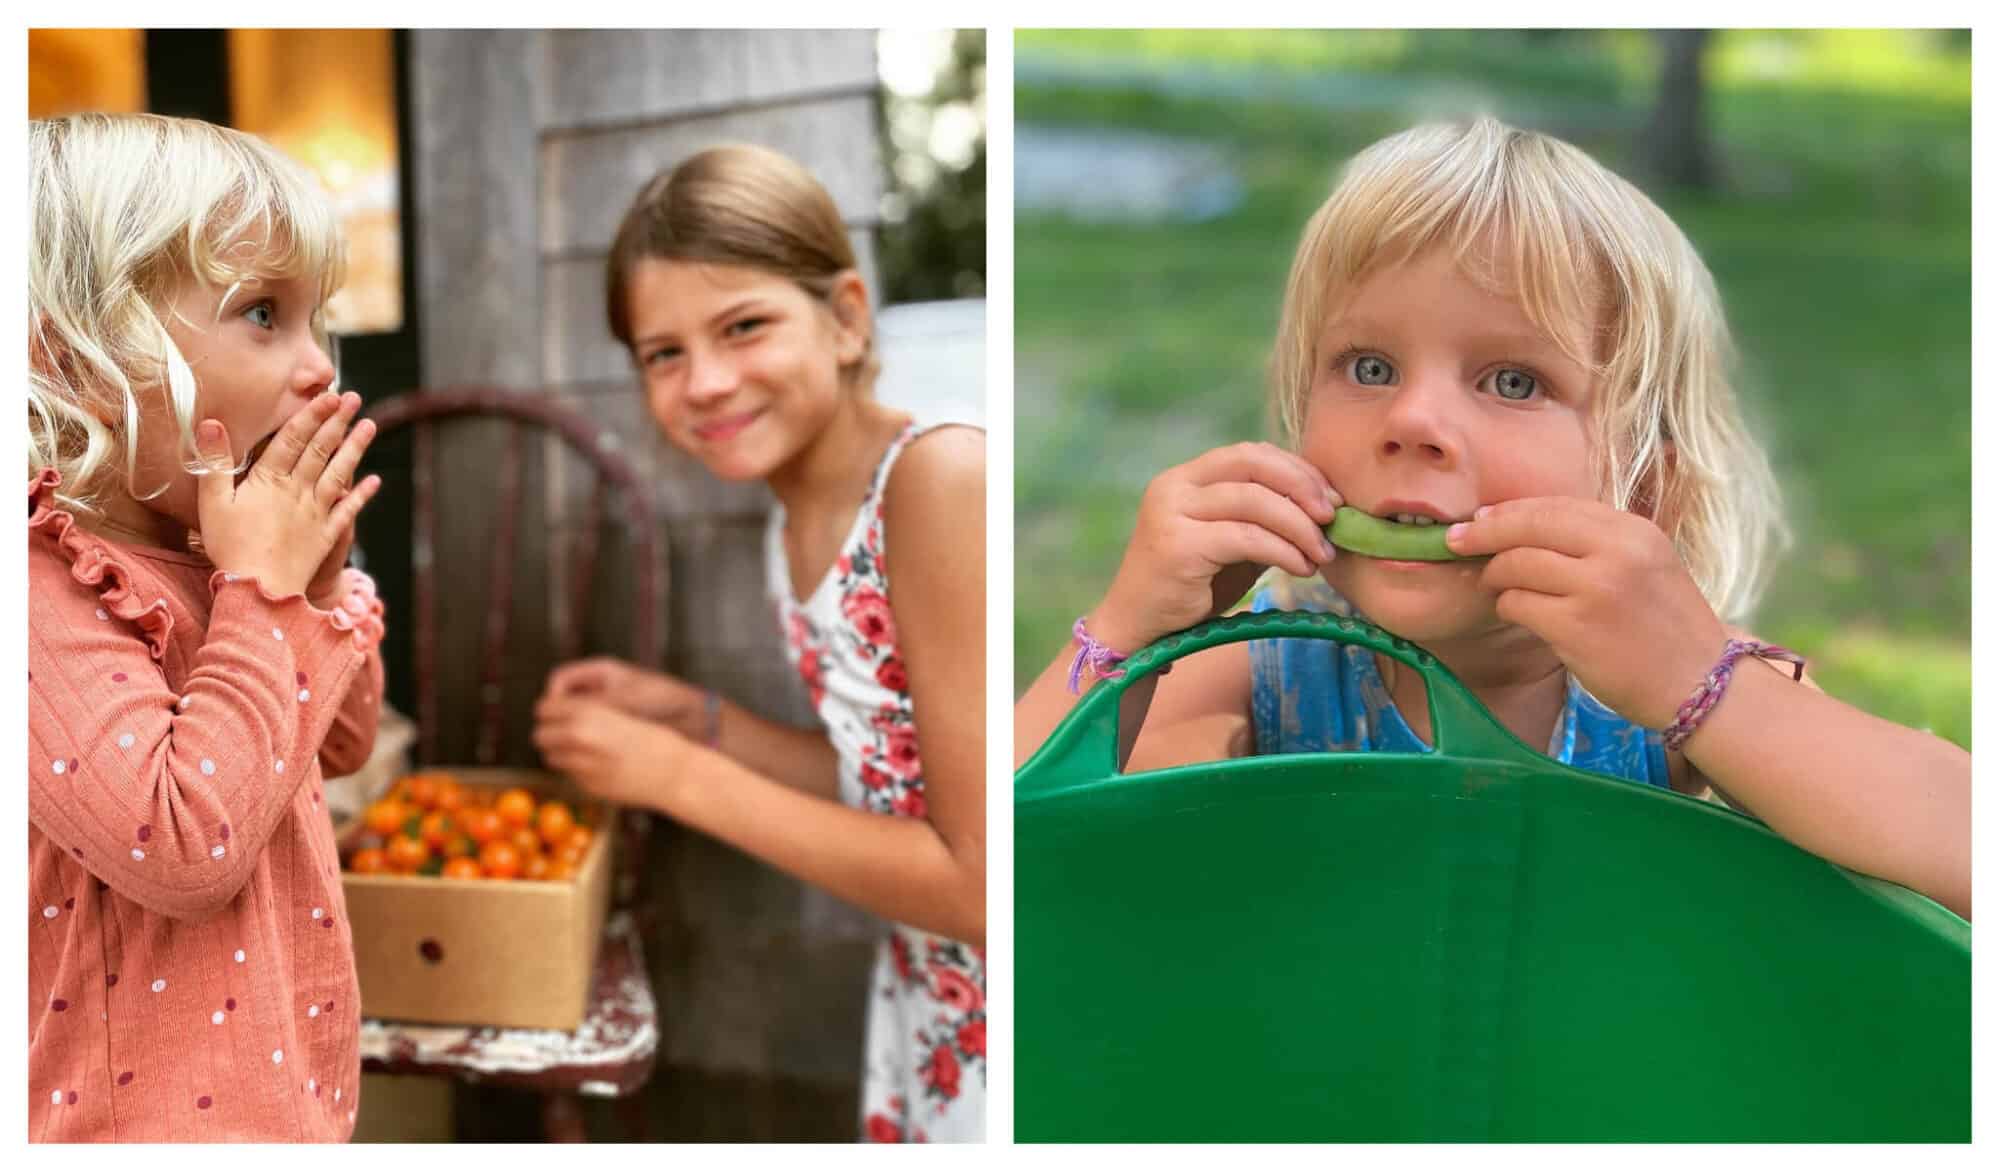 Left: Two young girls eat some cherry tomatoes from Veggies to Table; Right: A young girl with blonde hair eats green beans from Veggies to Table.